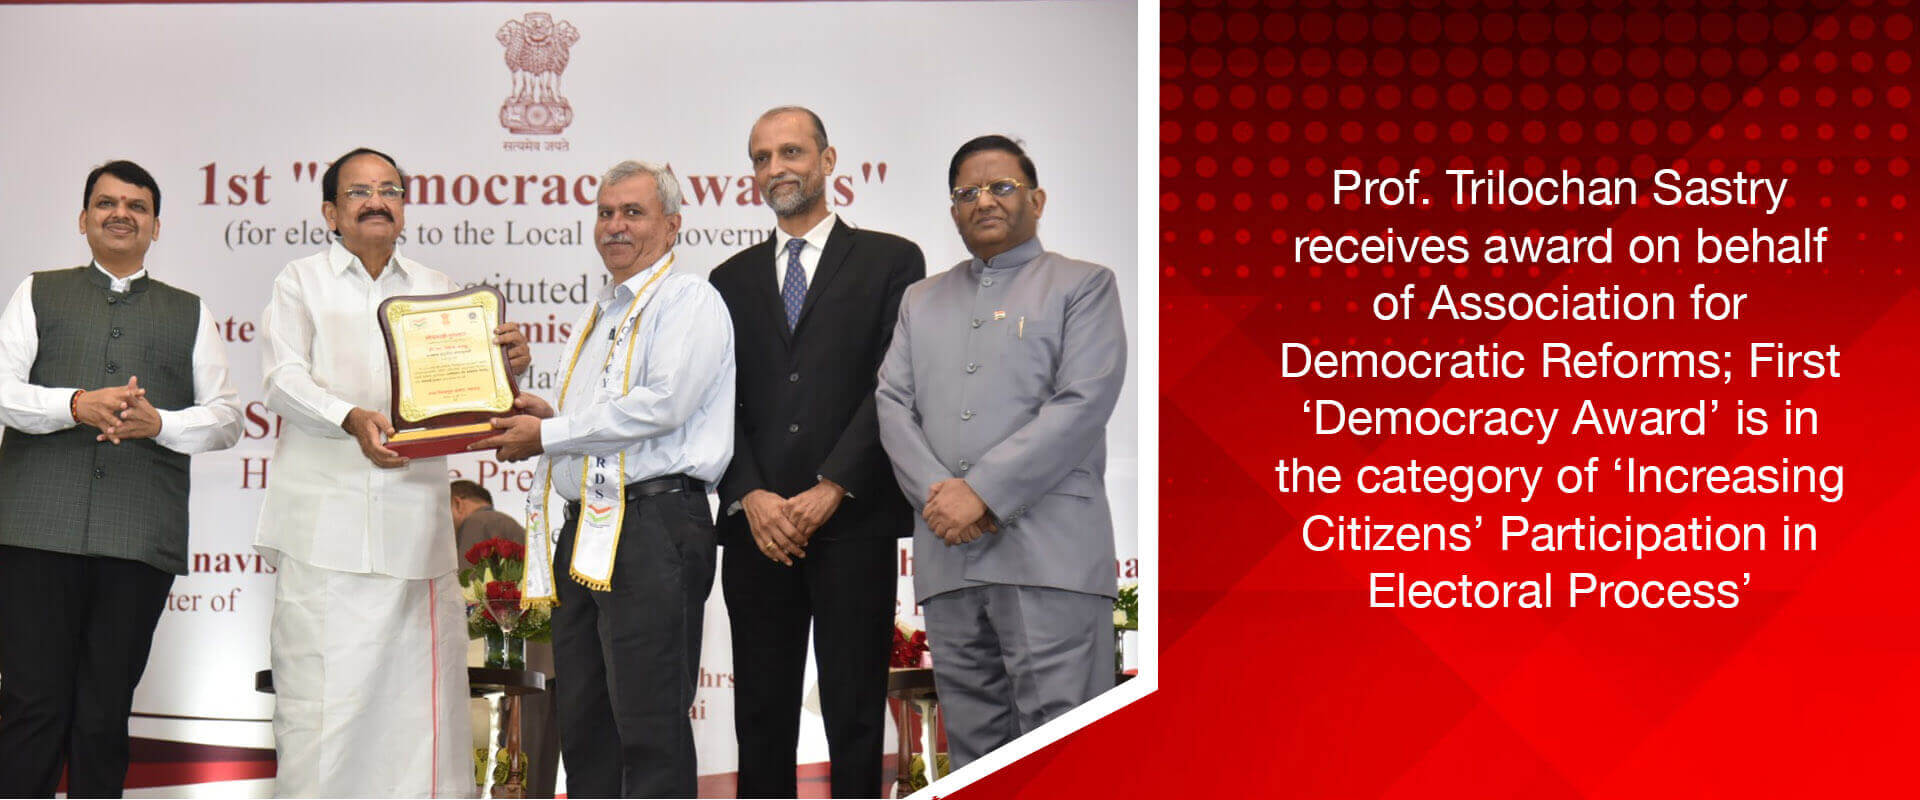 Prof. Trilochan Sastry receives award on behalf of Association for Democratic Reforms; First ‘Democracy Award’ is in the category of ‘Increasing Citizens’ Participation in Electoral Process